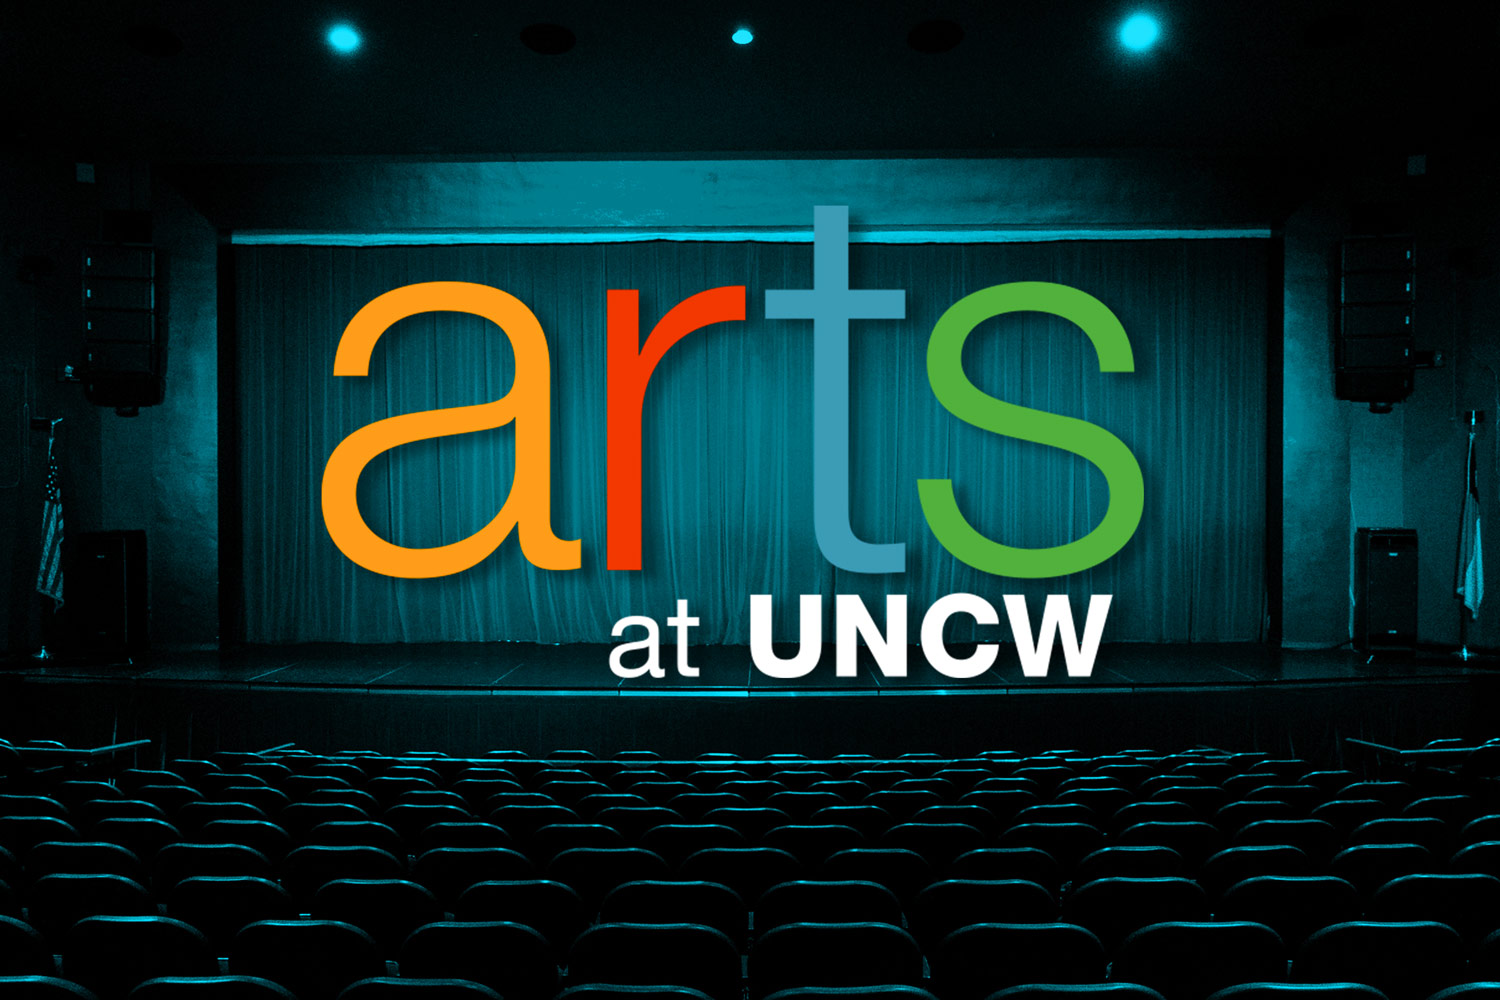 UNCW Arts over pic of state with red curtain